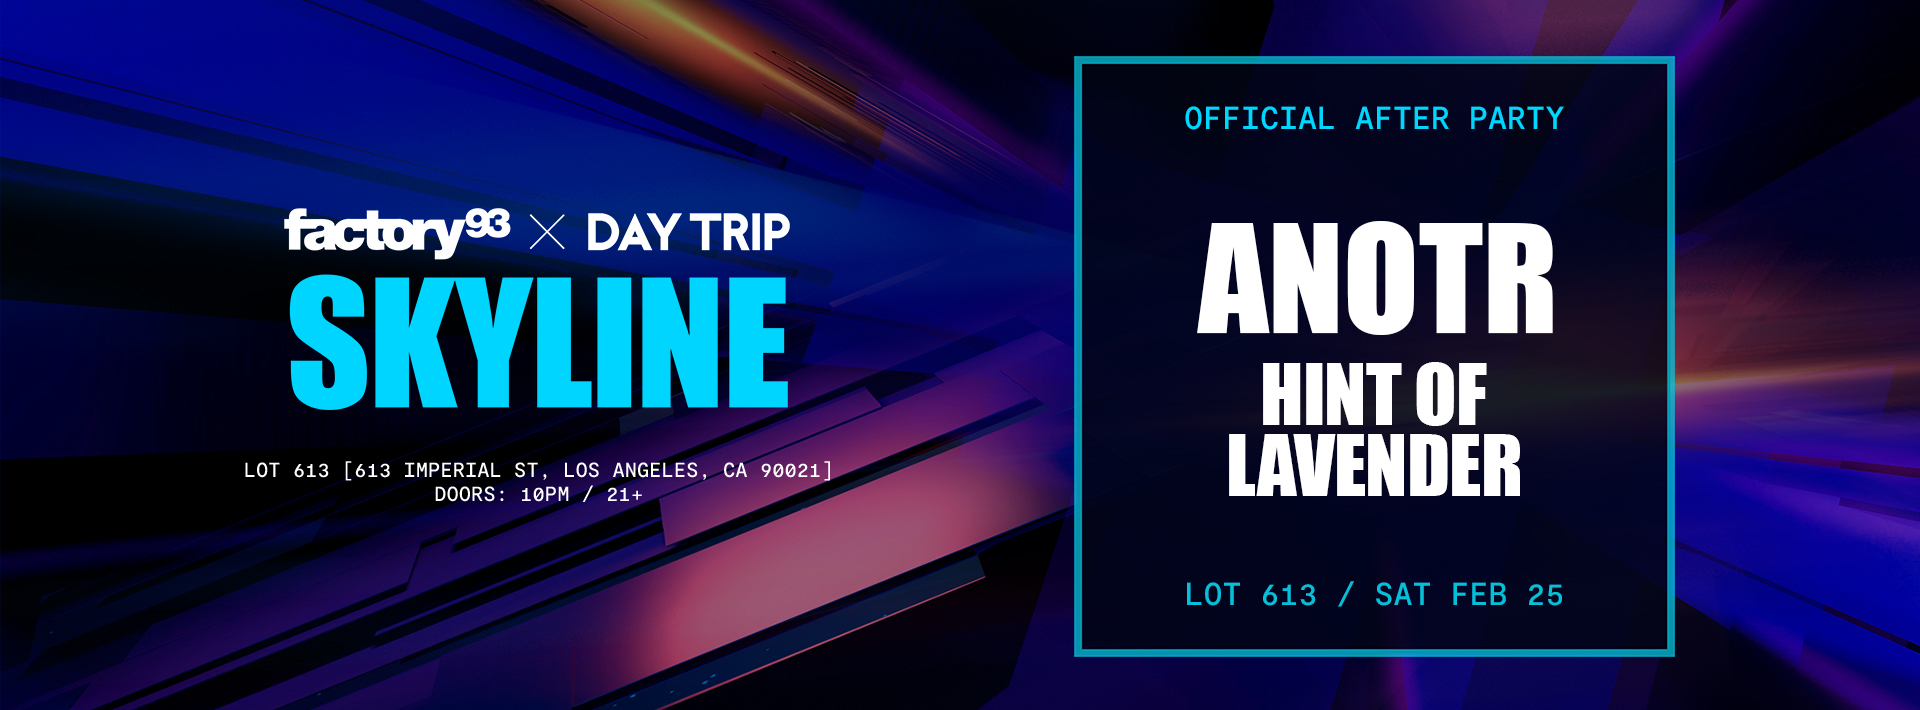 Skyline Afterparty: ANOTR